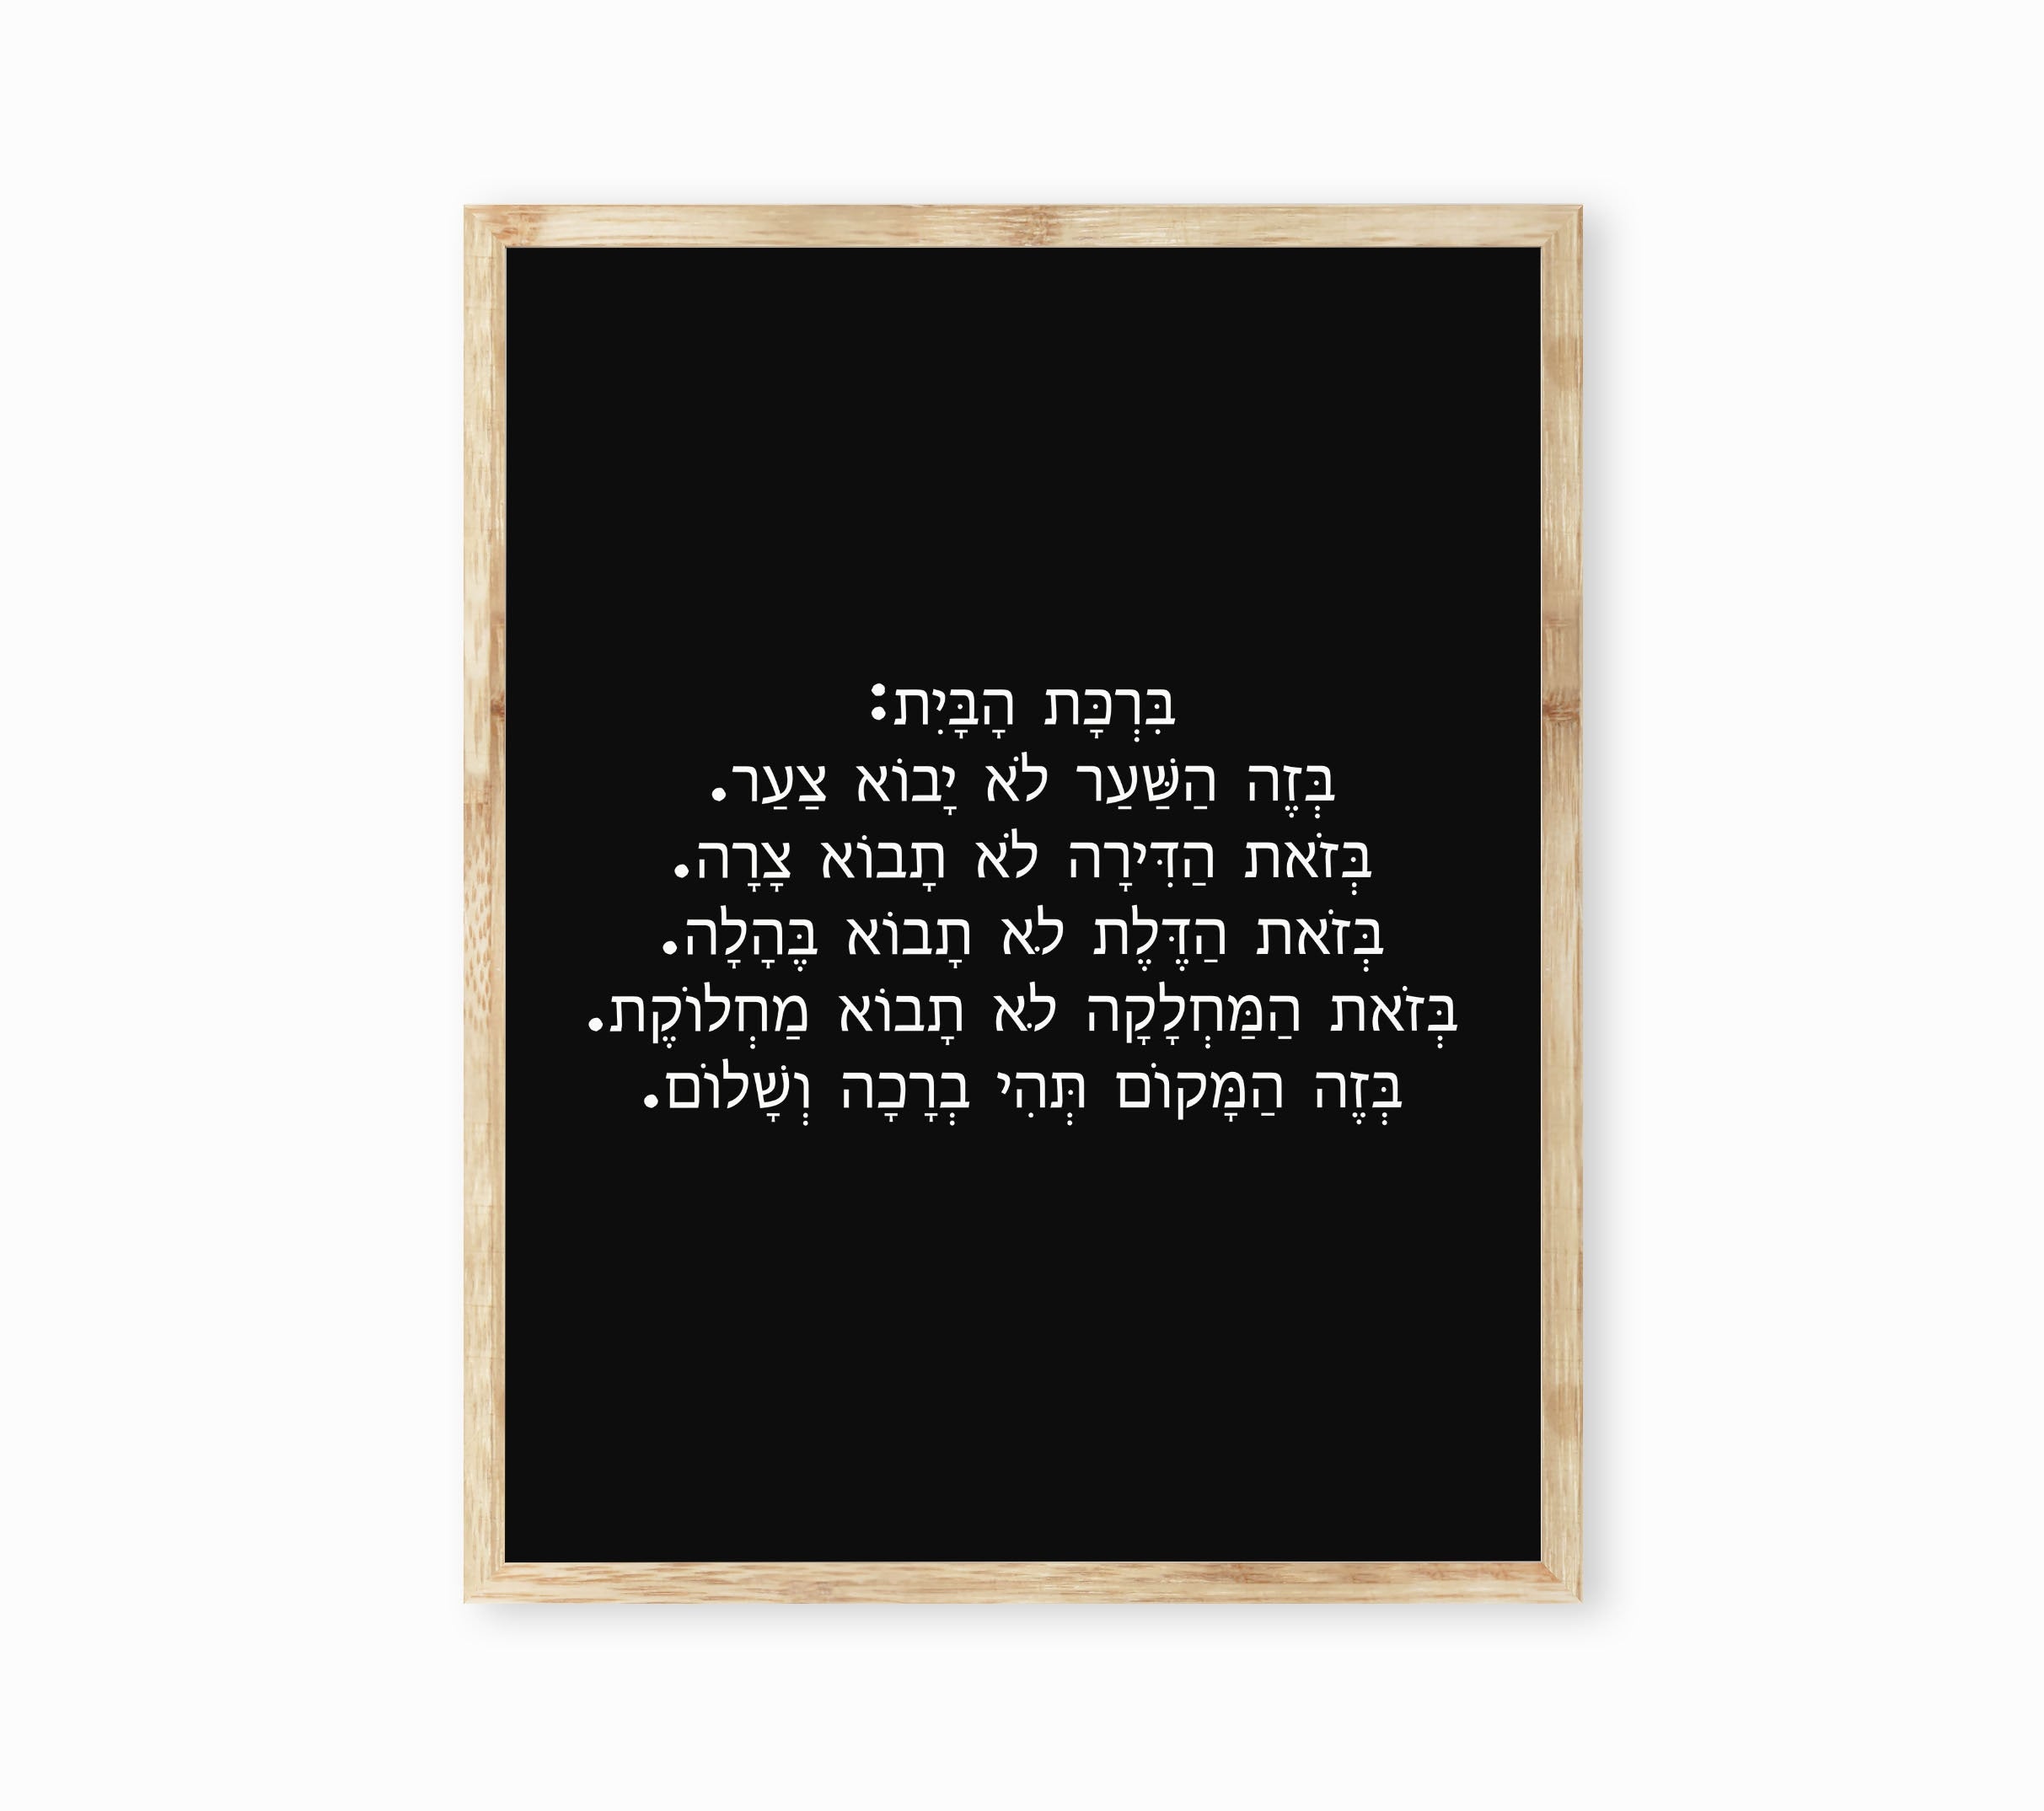 Jewish Home Blessing Wall Art Print in Hebrew, Birkat Habayit Jewish Prayer Unframed Wall Decor in Black and White